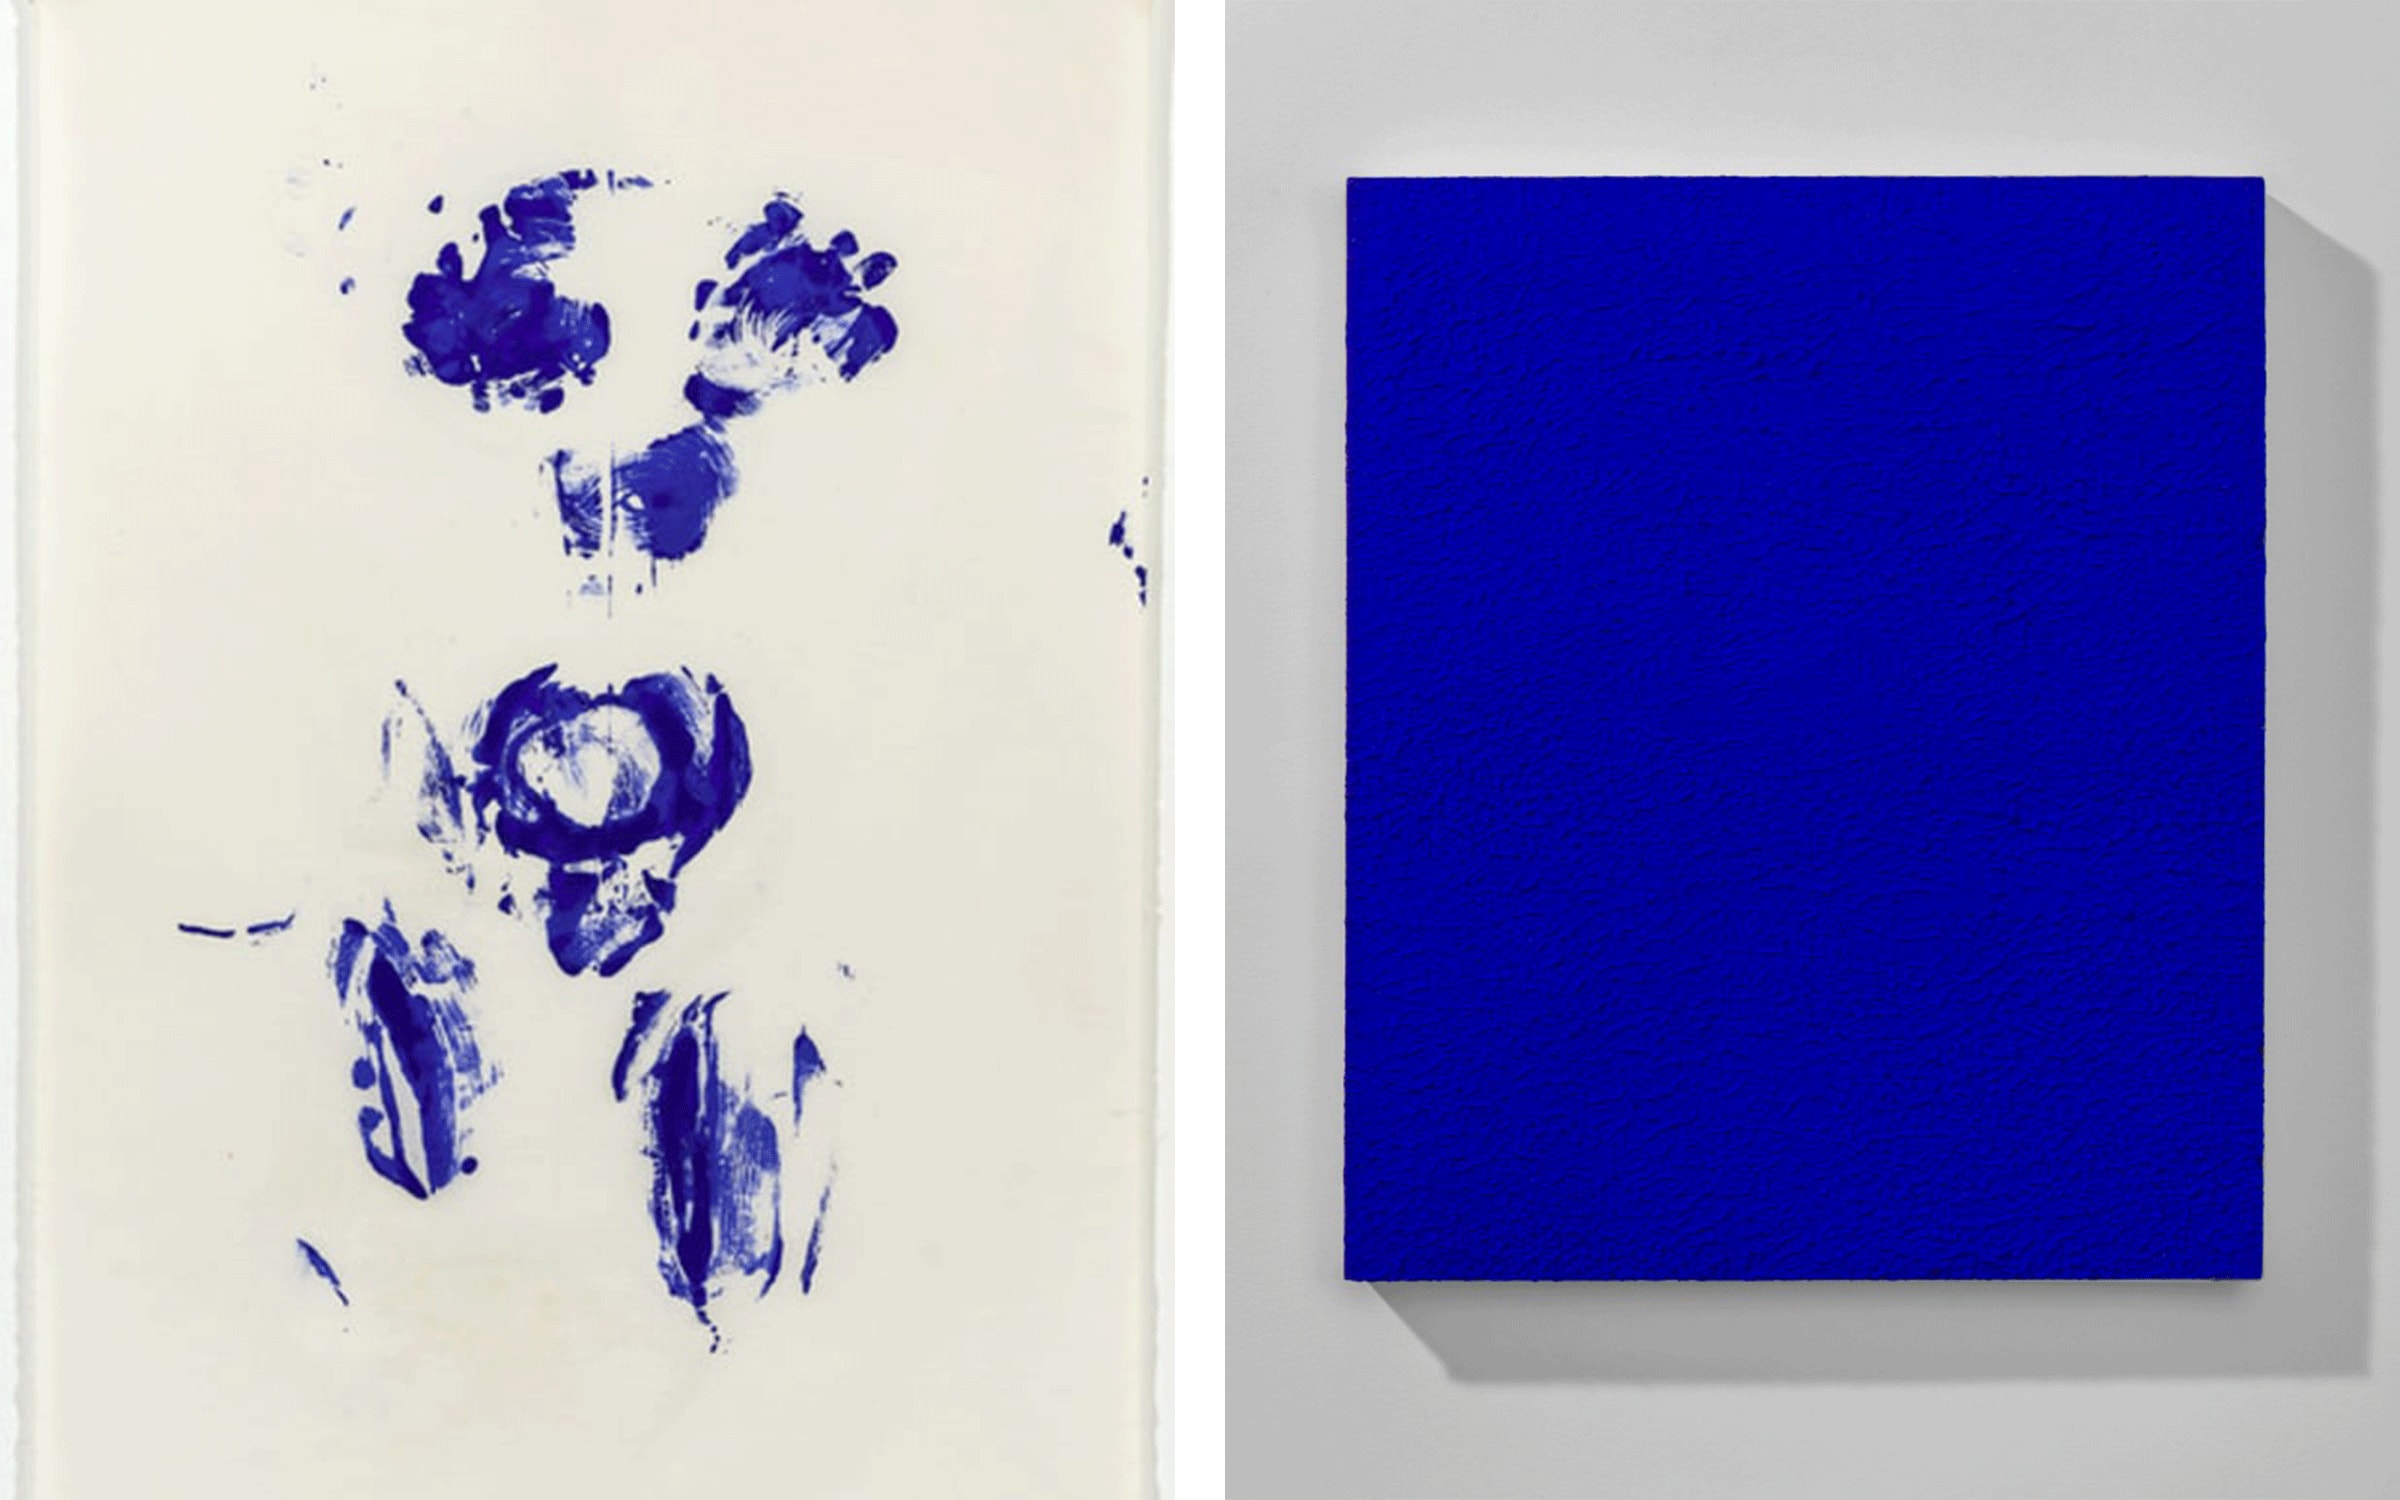 Left: Yves Klein, Ant Su 5, 1960. Exhibited at Art Basel in Basel in 2015 by The Mayor Gallery. Right: Yves Klein, Monochrome bleu (IKB 242 A), 1959. Exhibited at Art Basel Miami Beach in 2019 by Galerie Thomas.